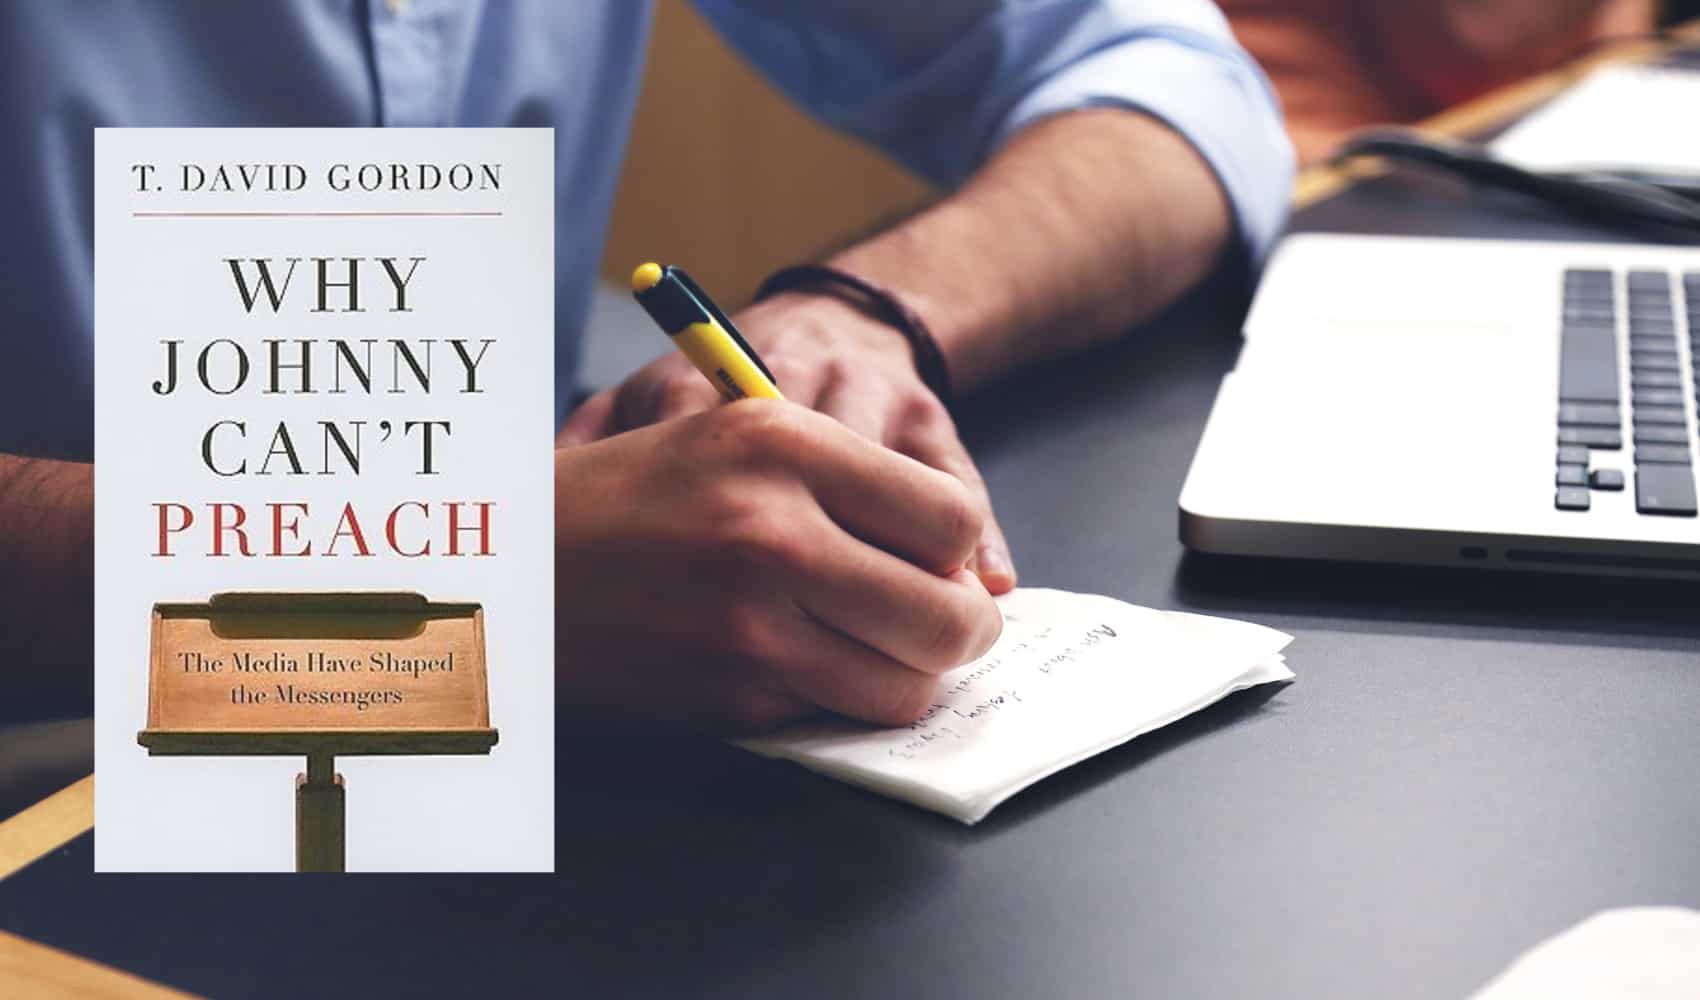 Top Quotes and Takeaways From <em>Why Johnny Can’t Preach</em>